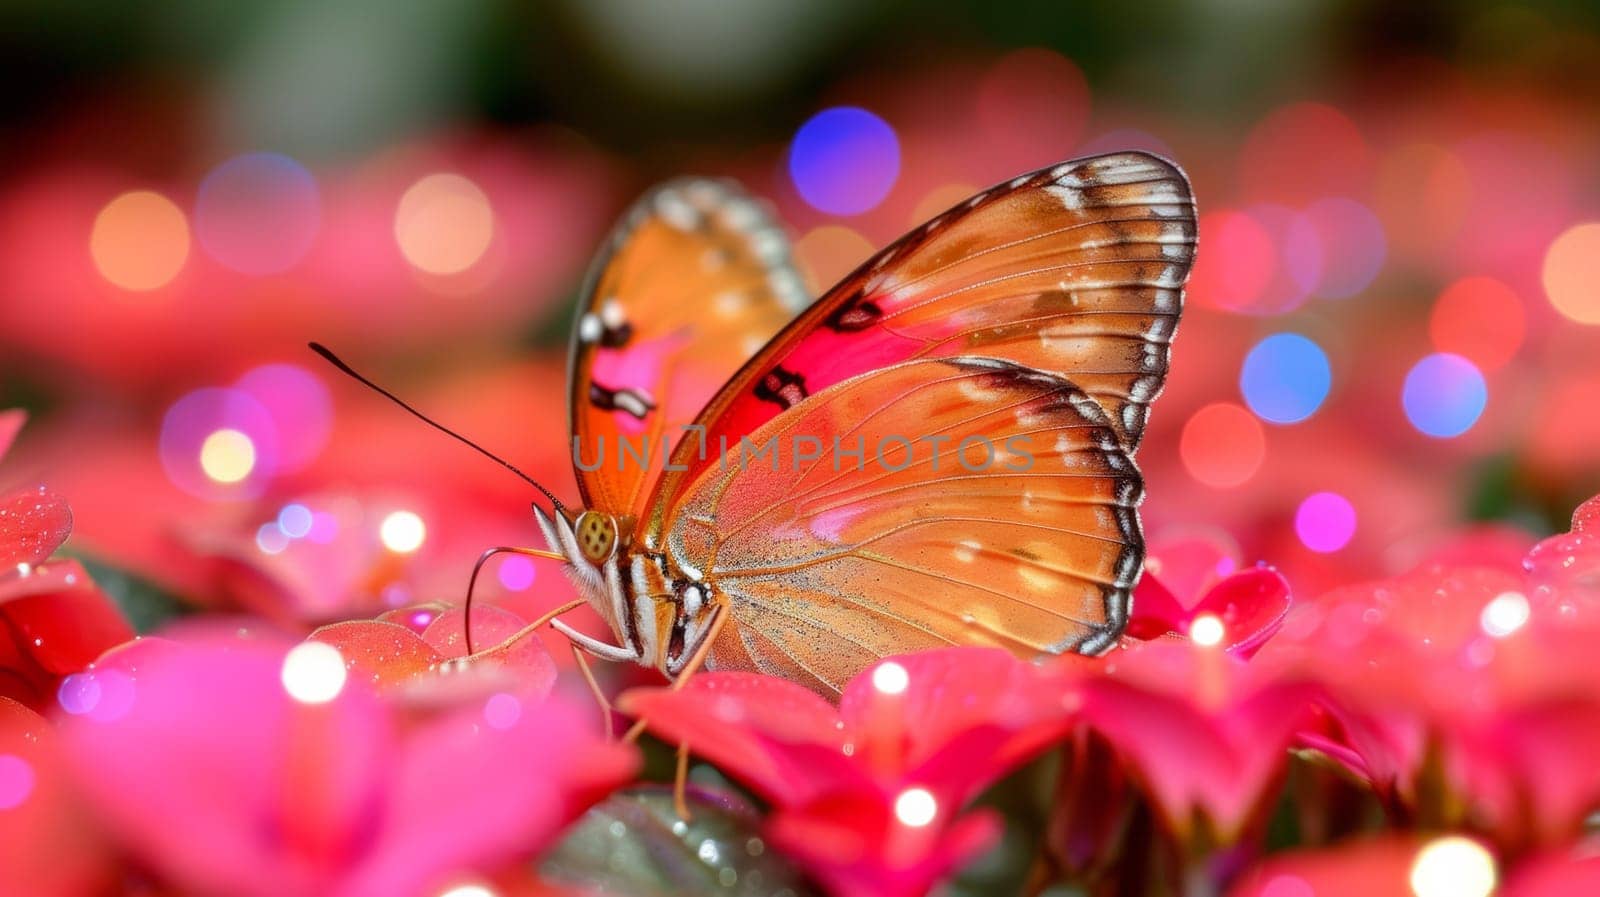 A butterfly sitting on a flower with bright lights in the background